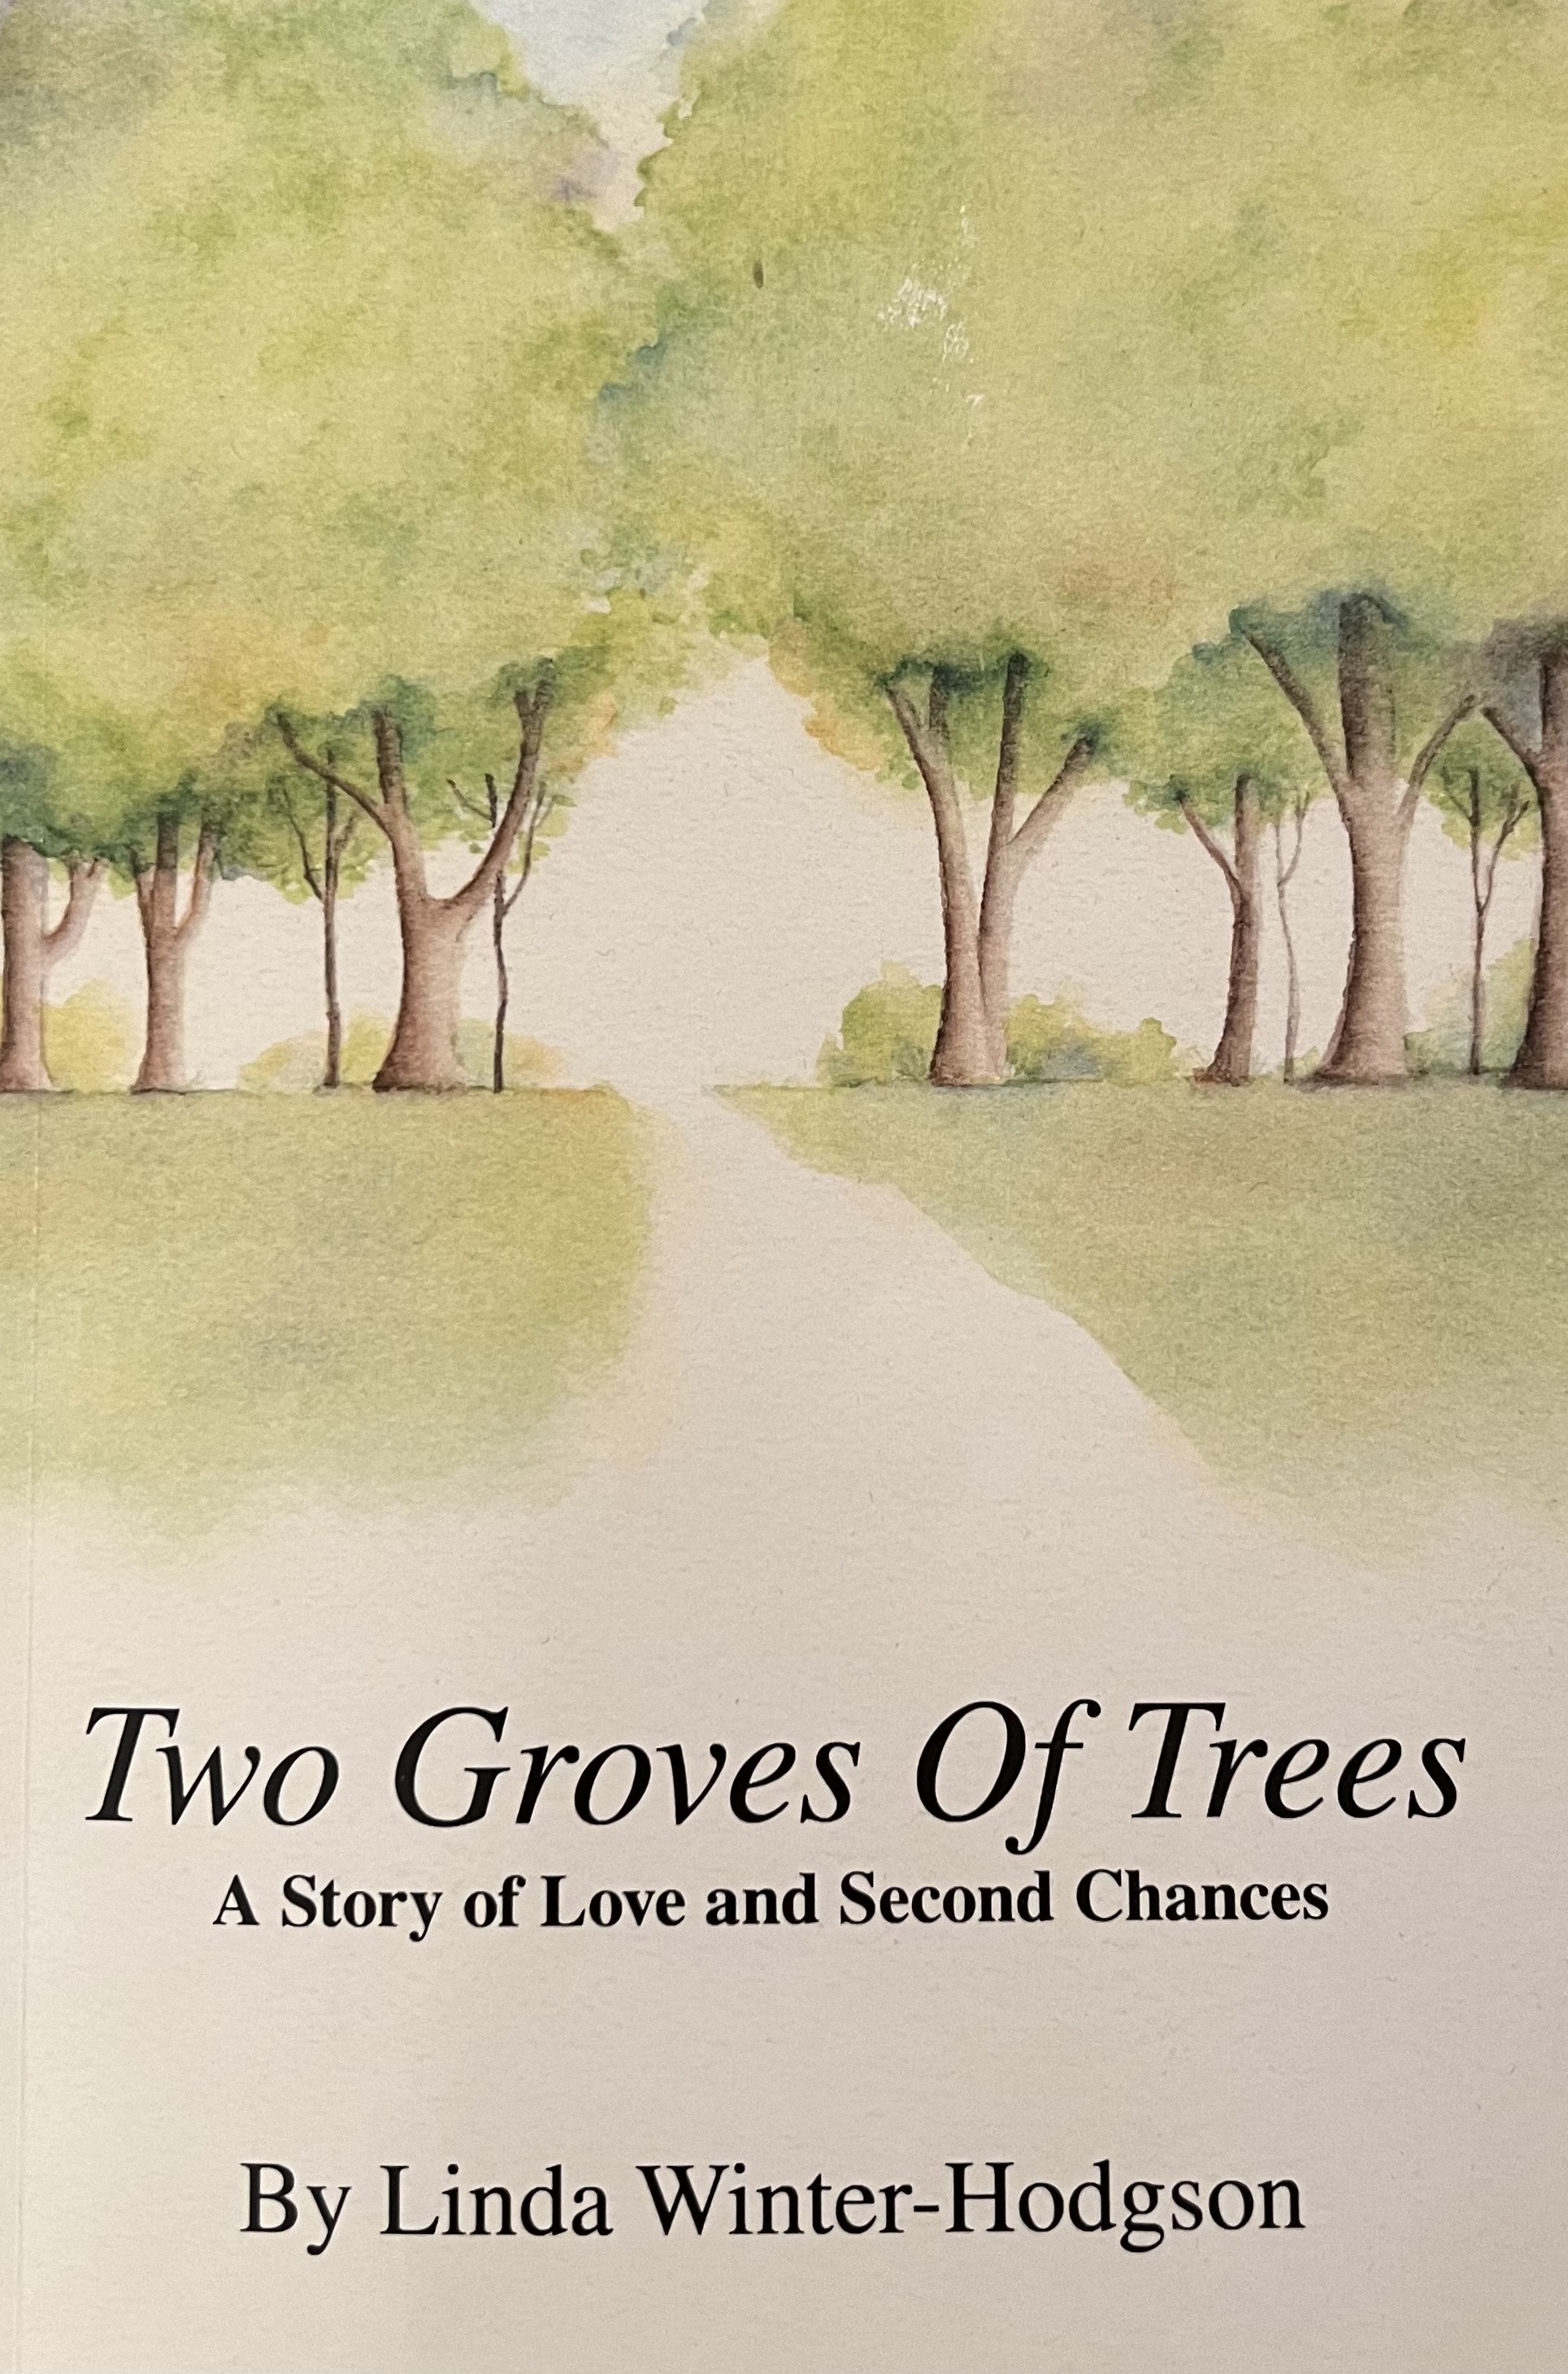 Two Groves of Trees